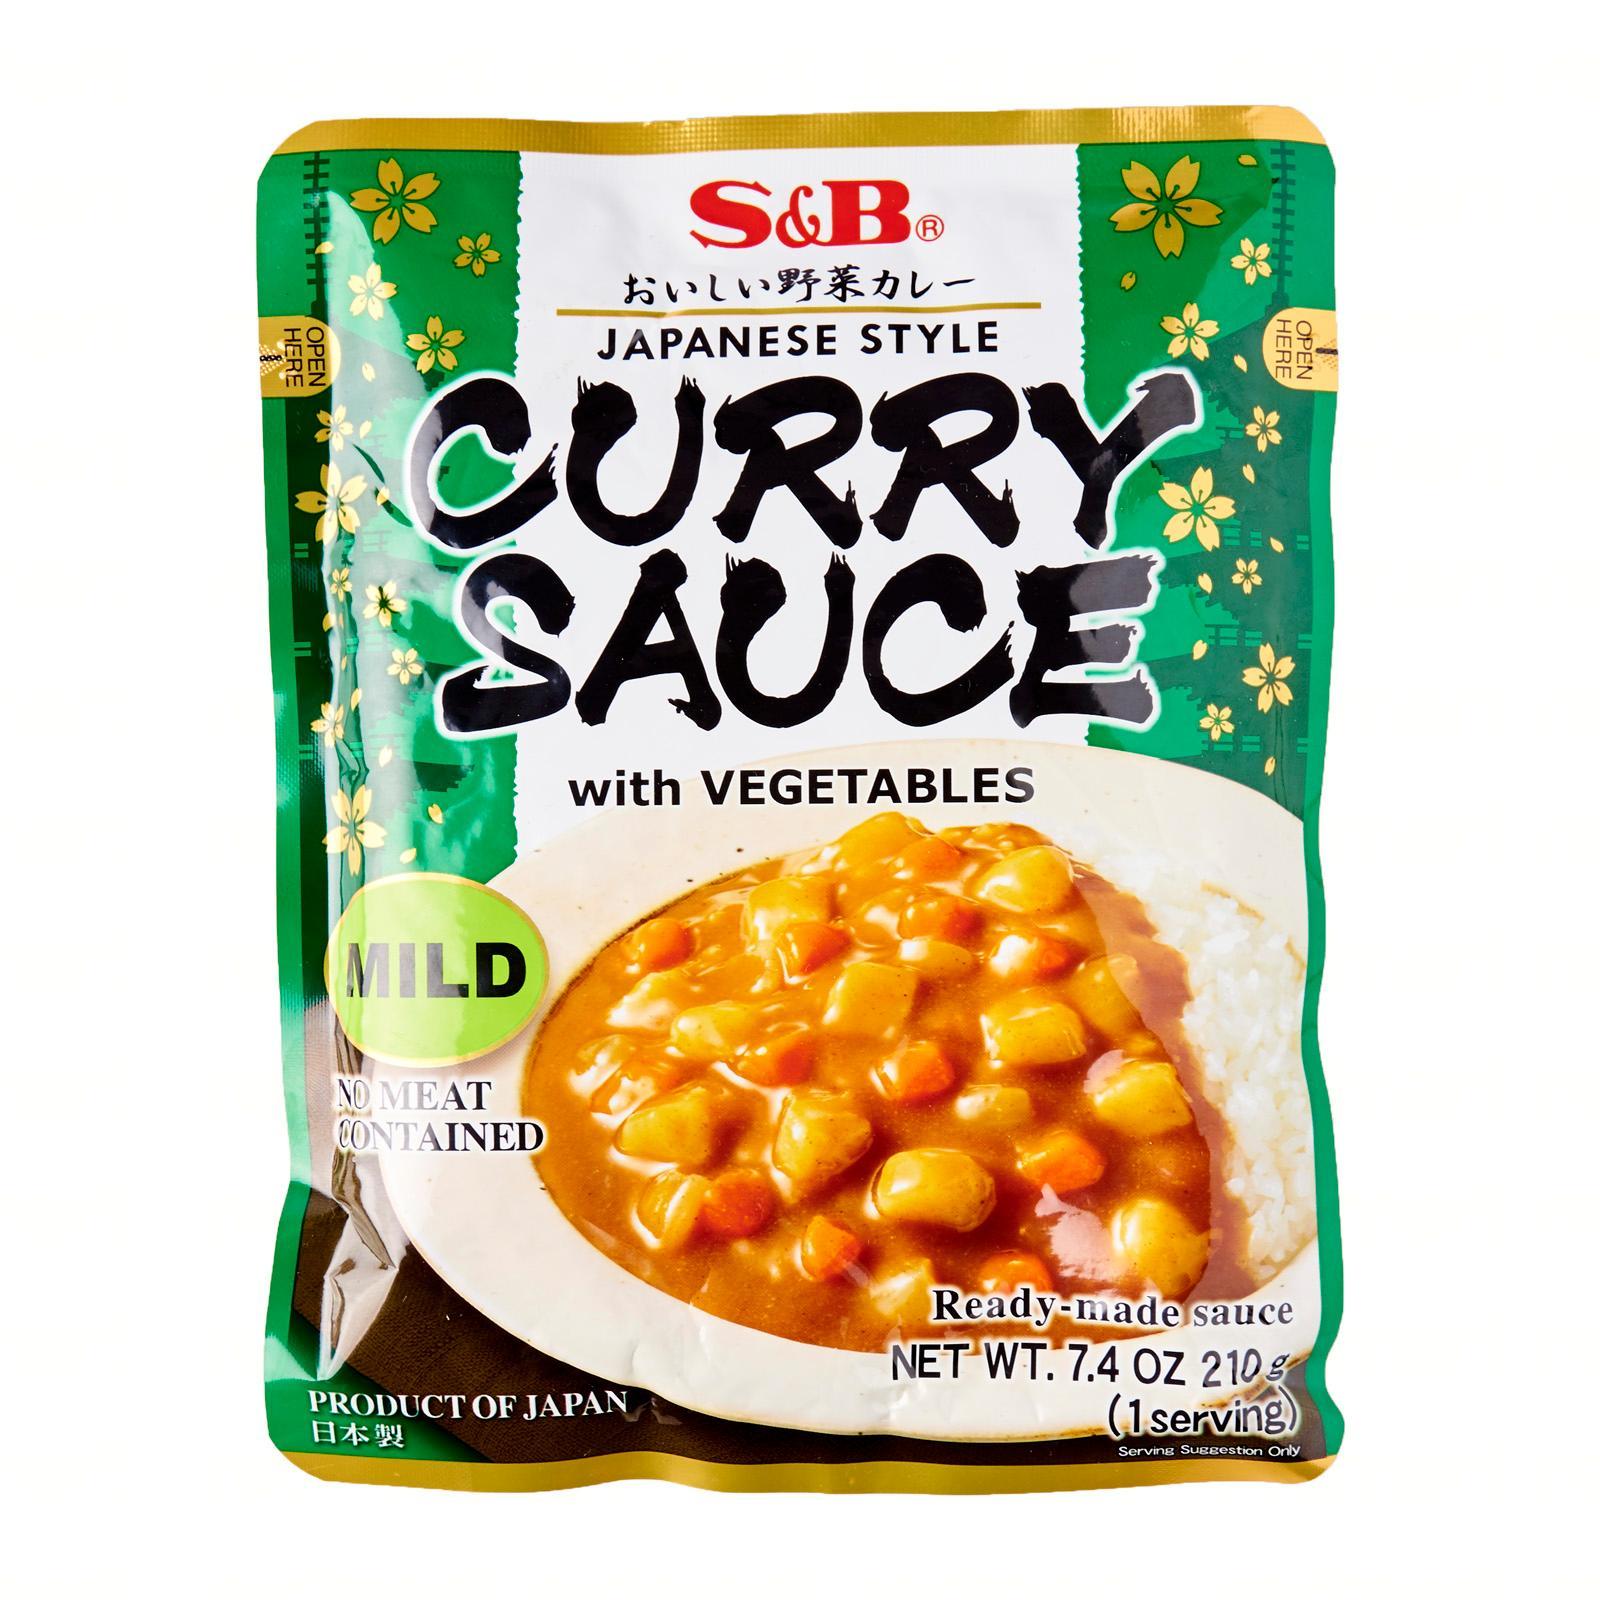 Japanese Instant Curry Sauce with Vegetables (Mild) 210g by S&B